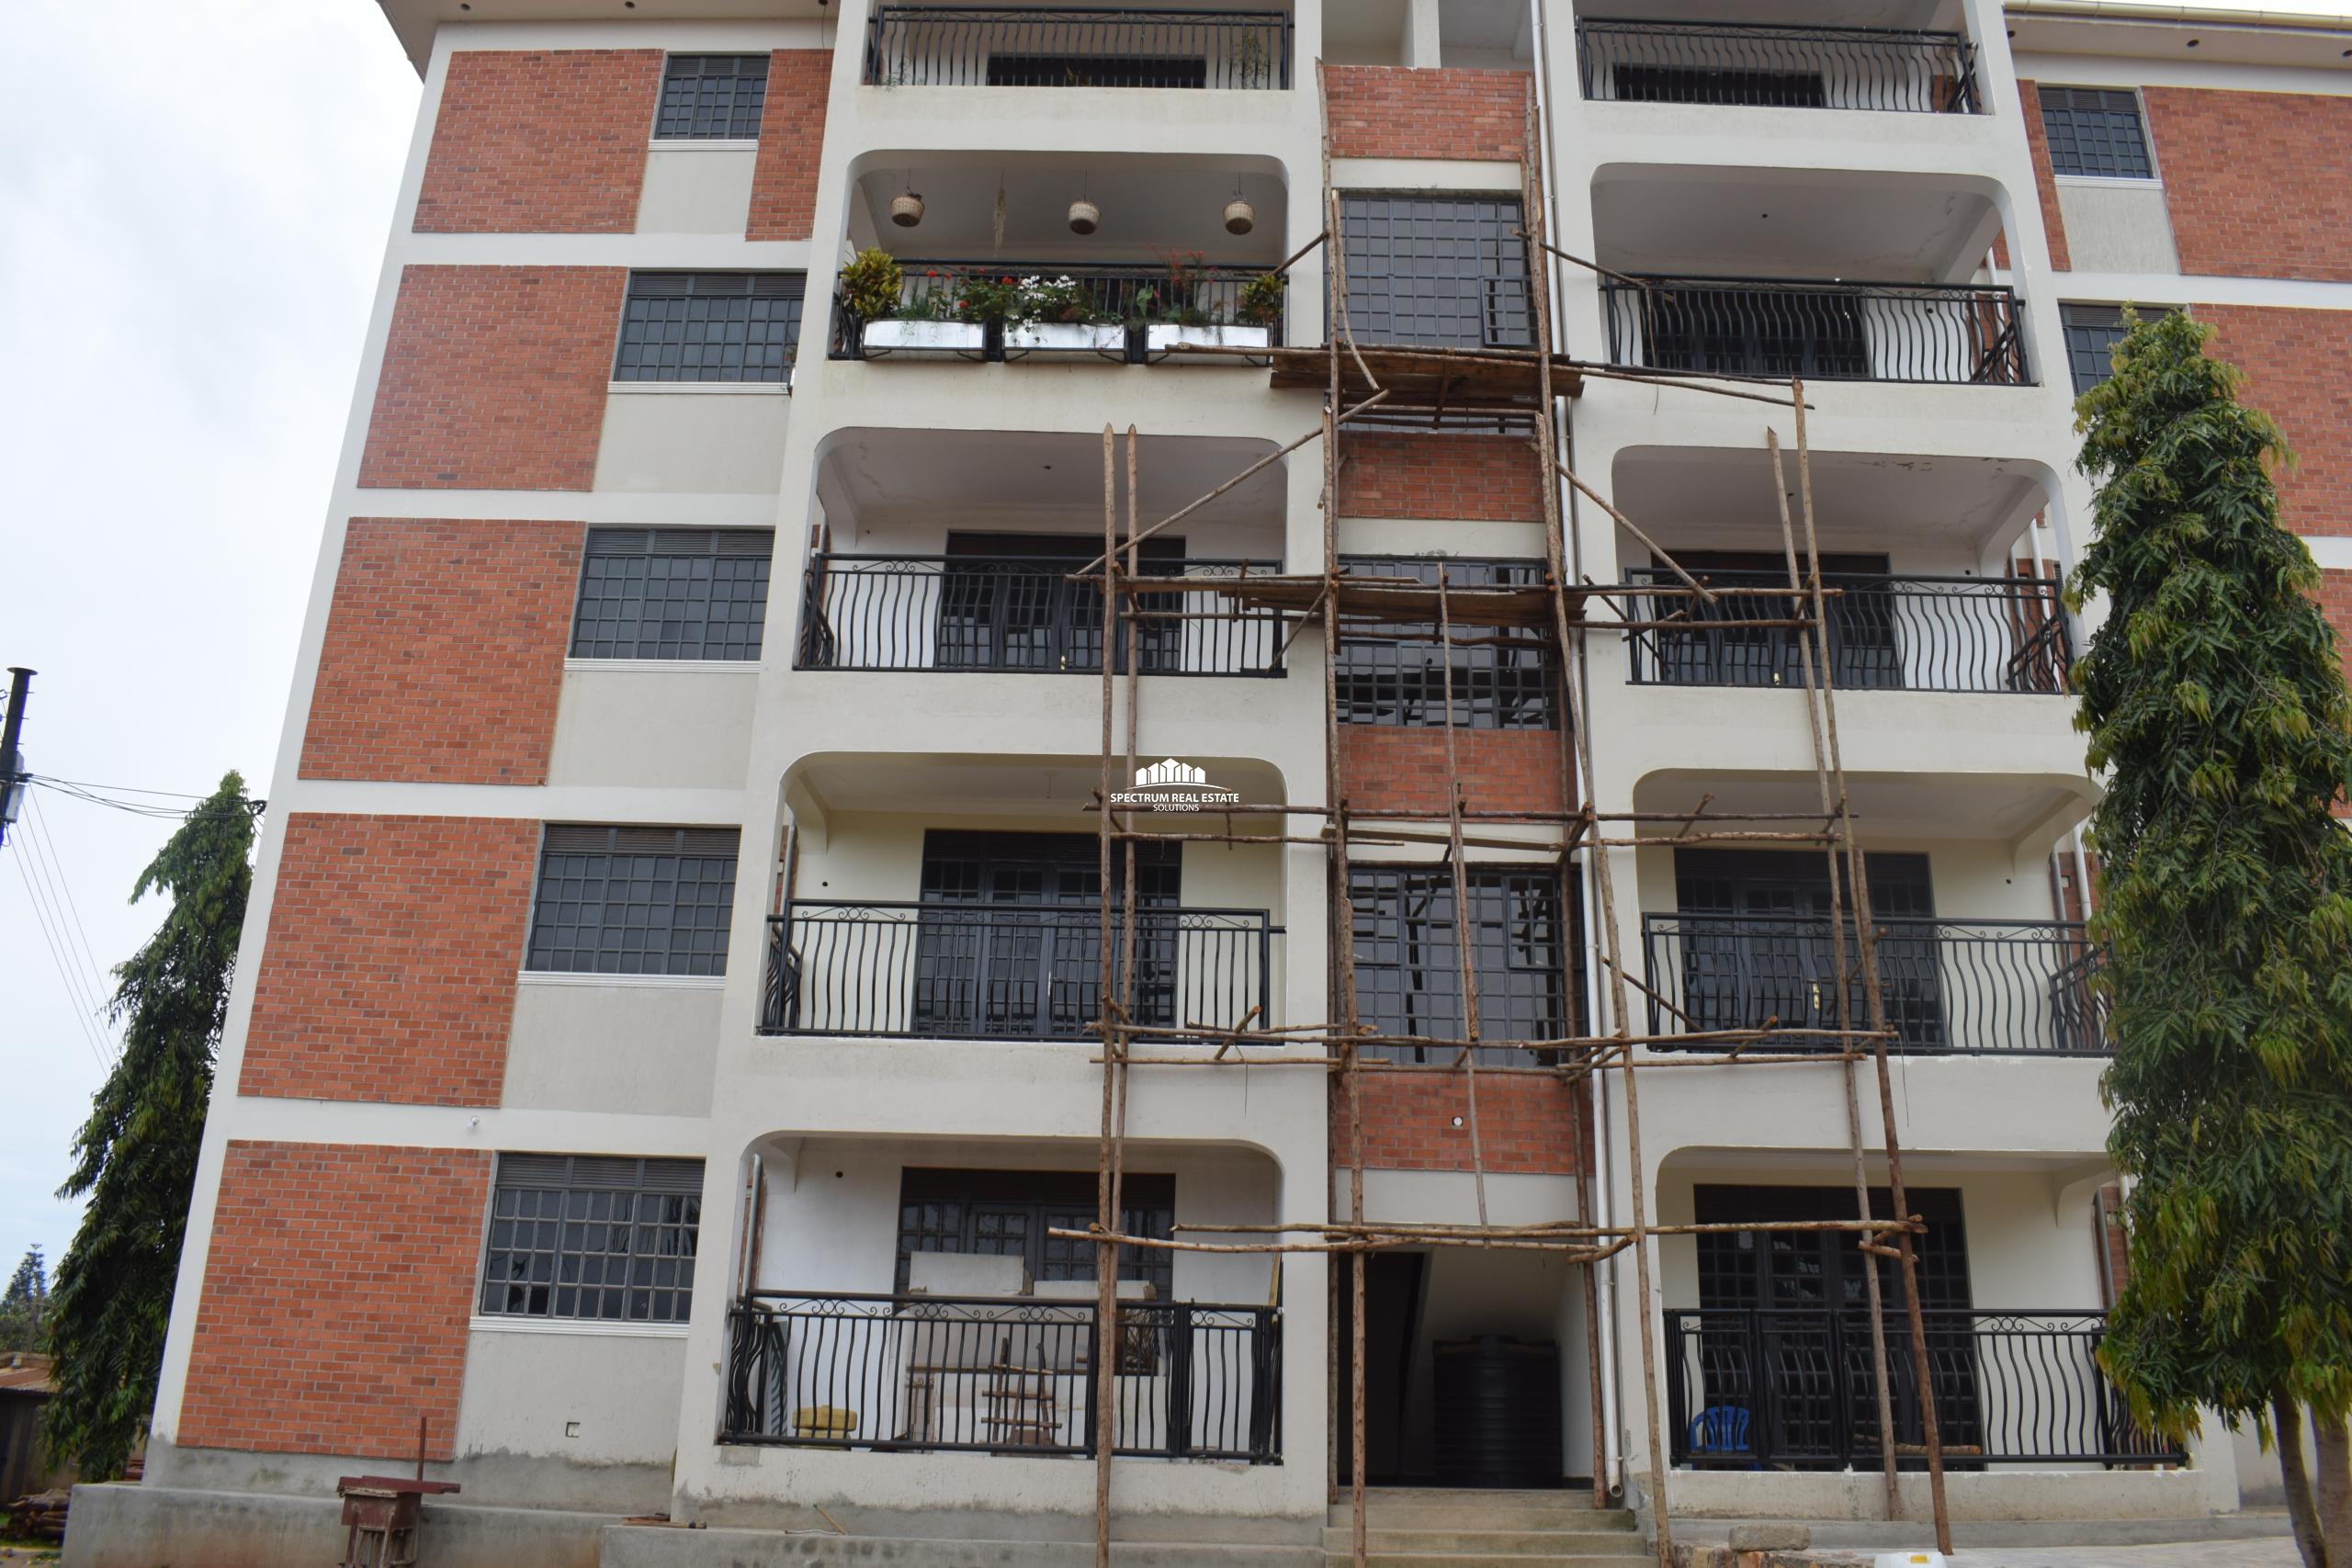 These apartments for rent in Kulambiro Kampala